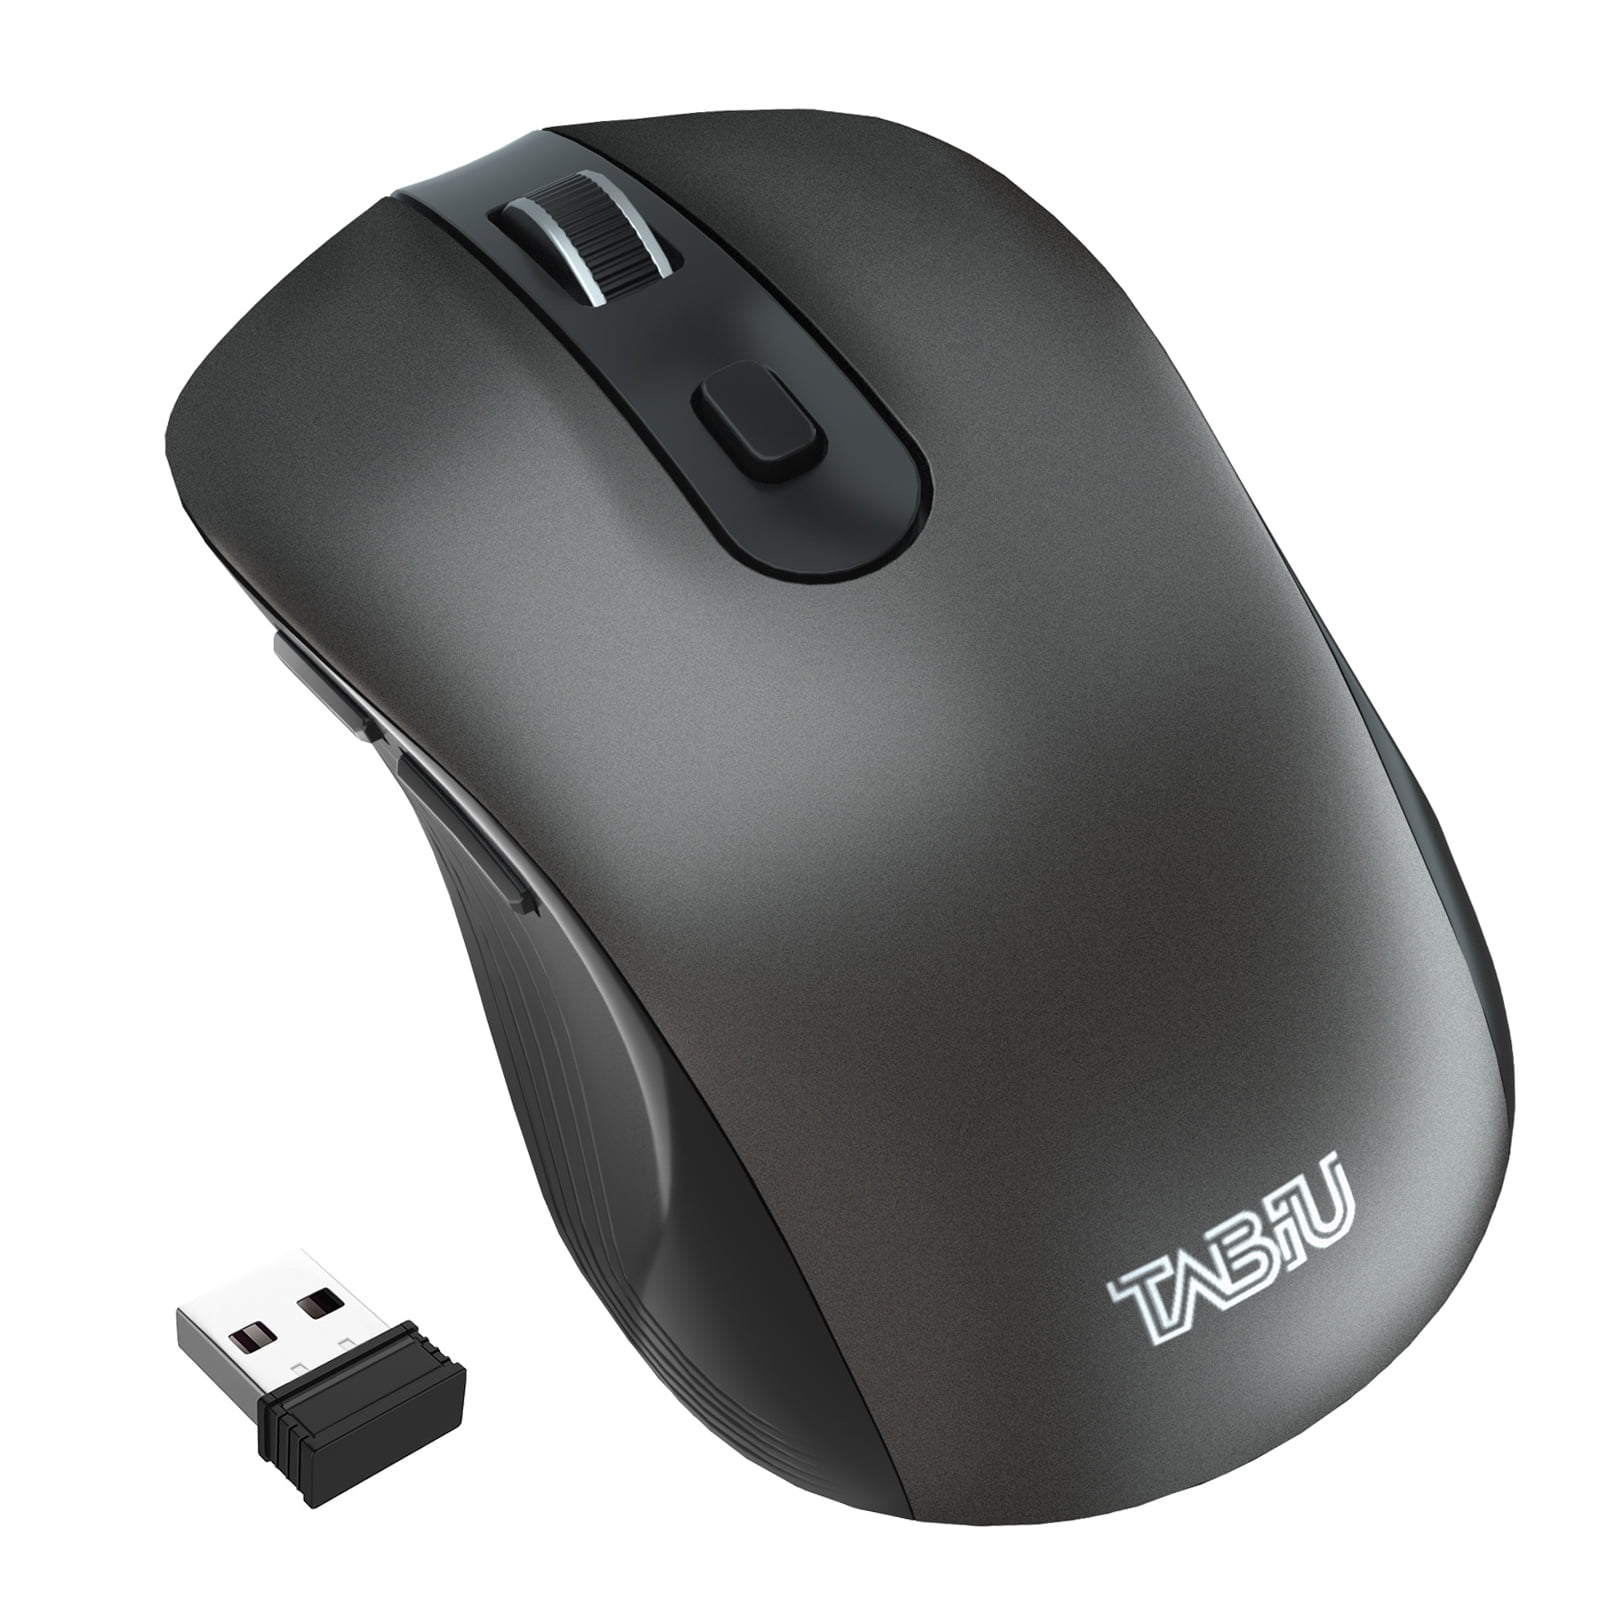 Portable Mobile Mouse Wireless Mouse【Silent & Convenient & Portable】Comfortable 2.4G Ergonomic Full Size Cordless Mice Easy Connect With Laptop/PC/Windows/Mac Etc.-Intelligent Energy Saving Programmab 